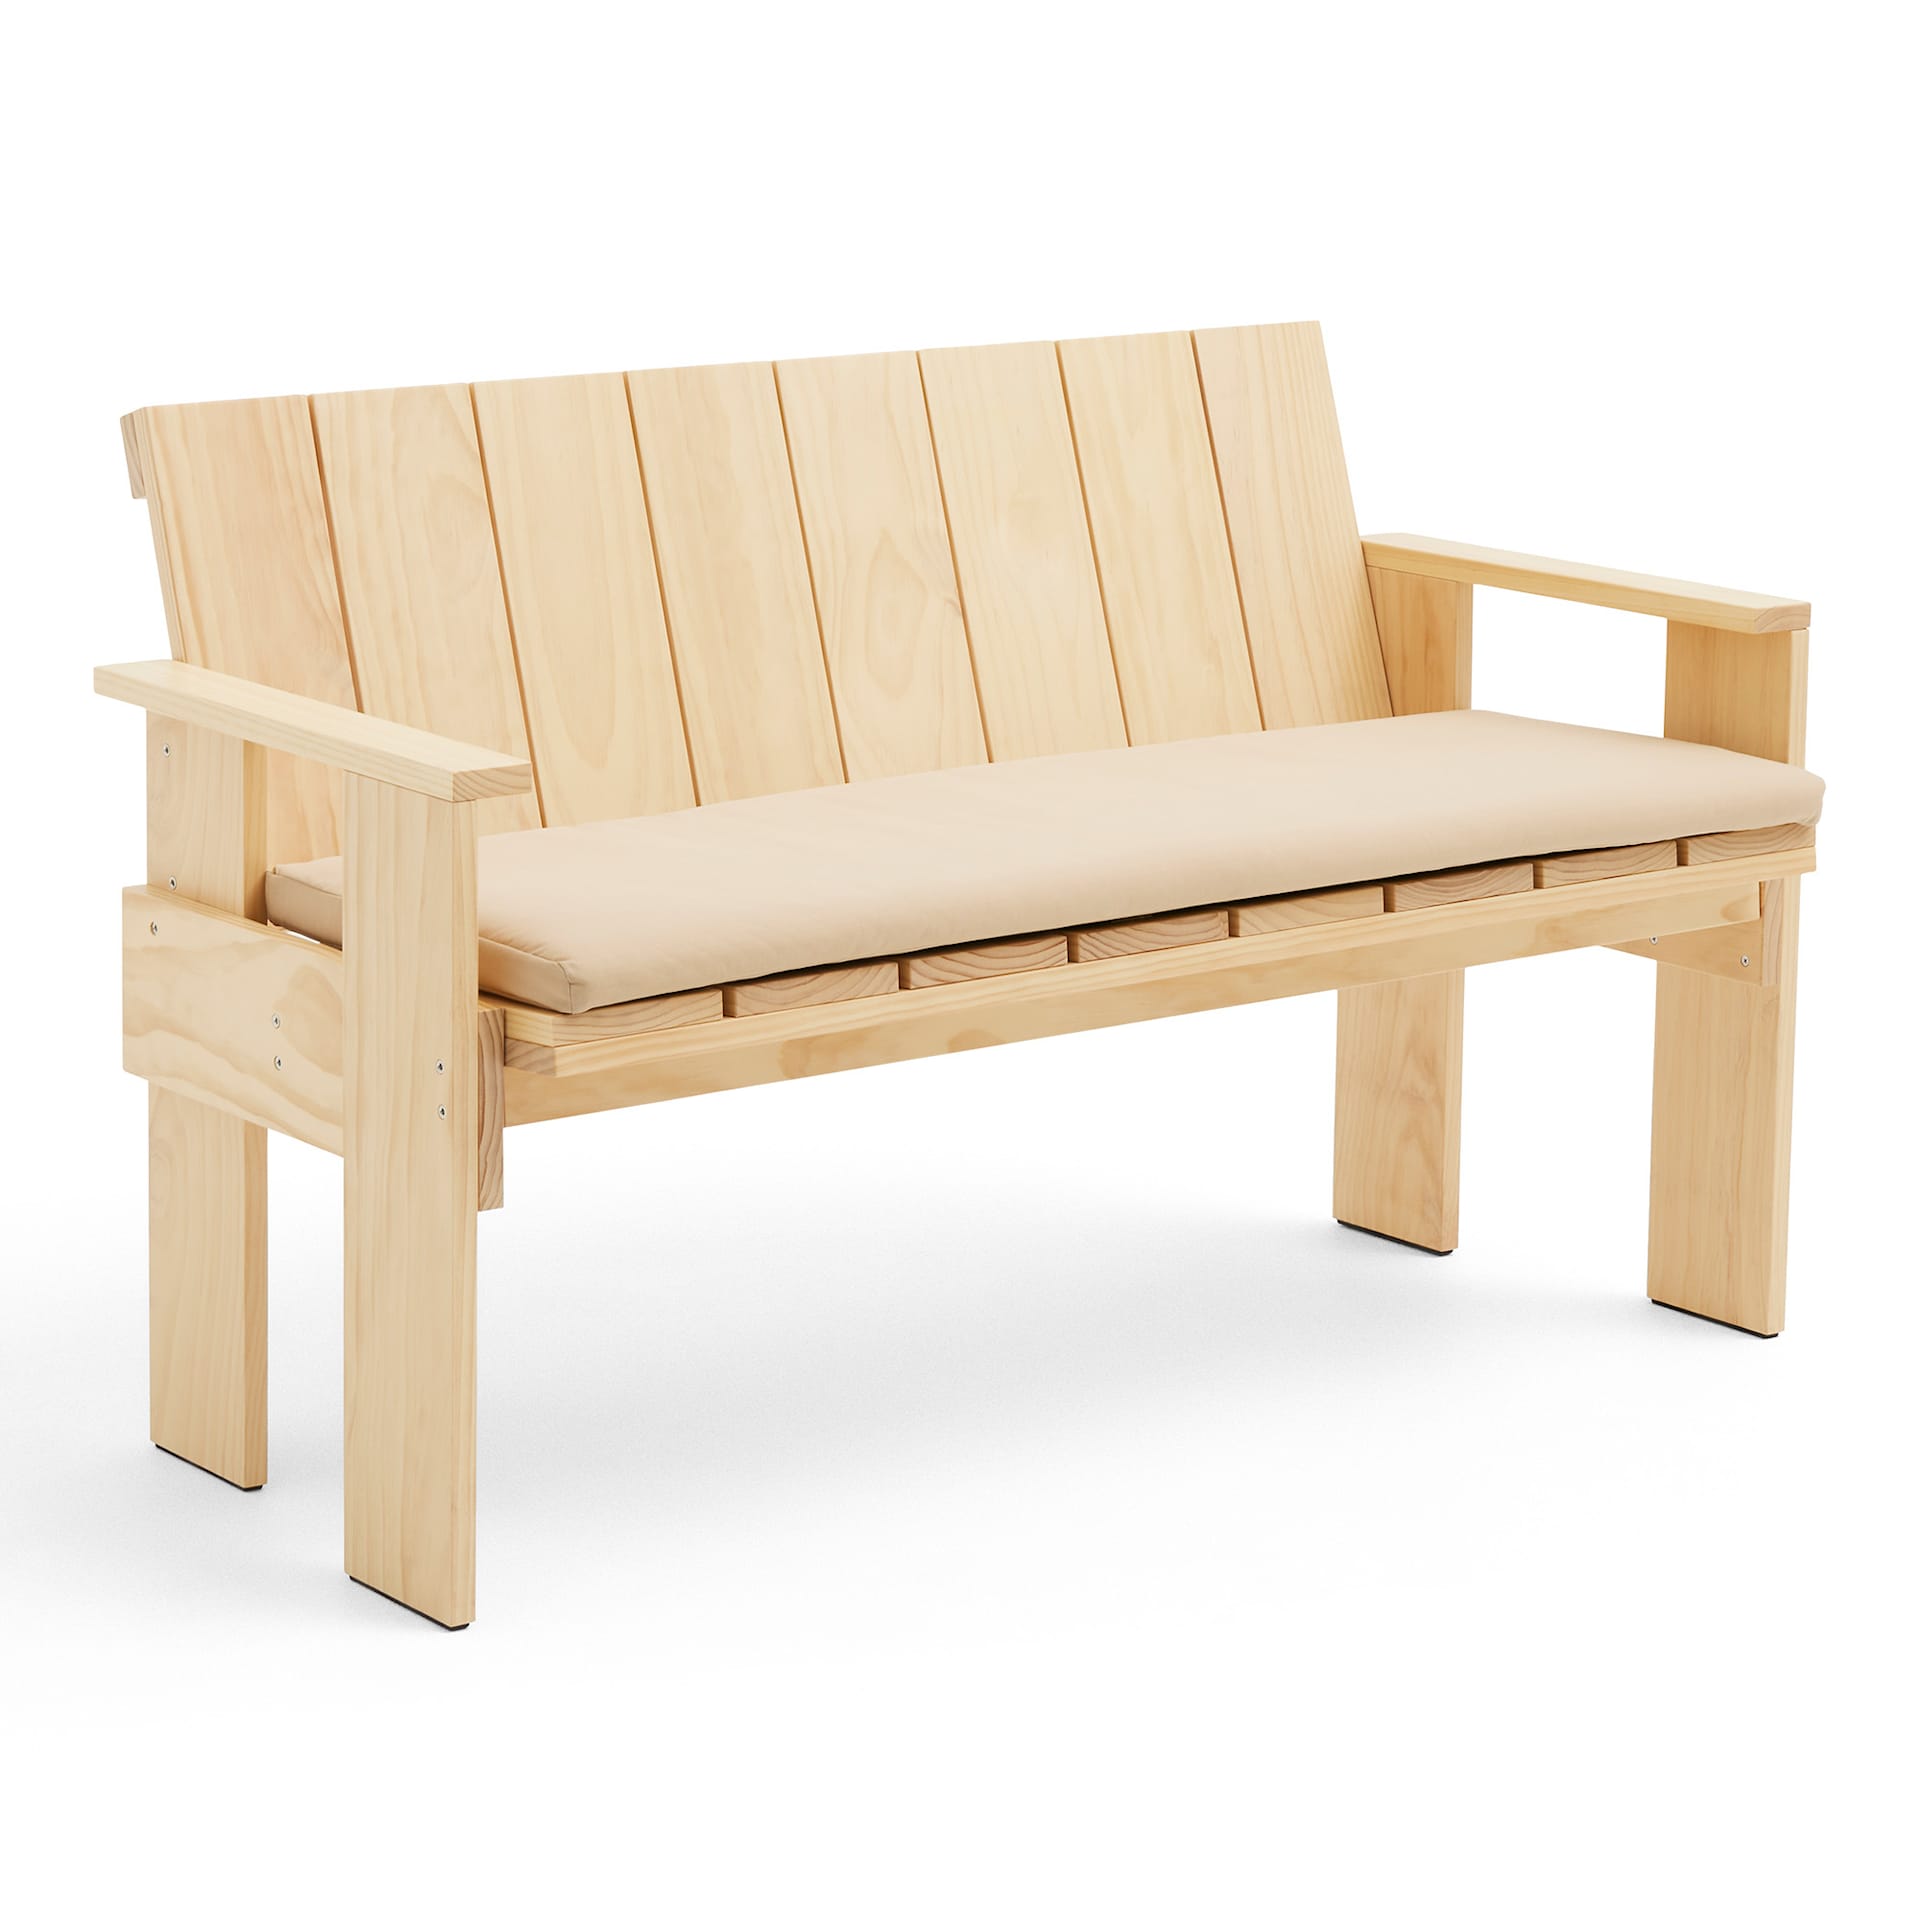 Seat Cushion for Crate Dining Bench - HAY - Gerrit Rietveld - NO GA